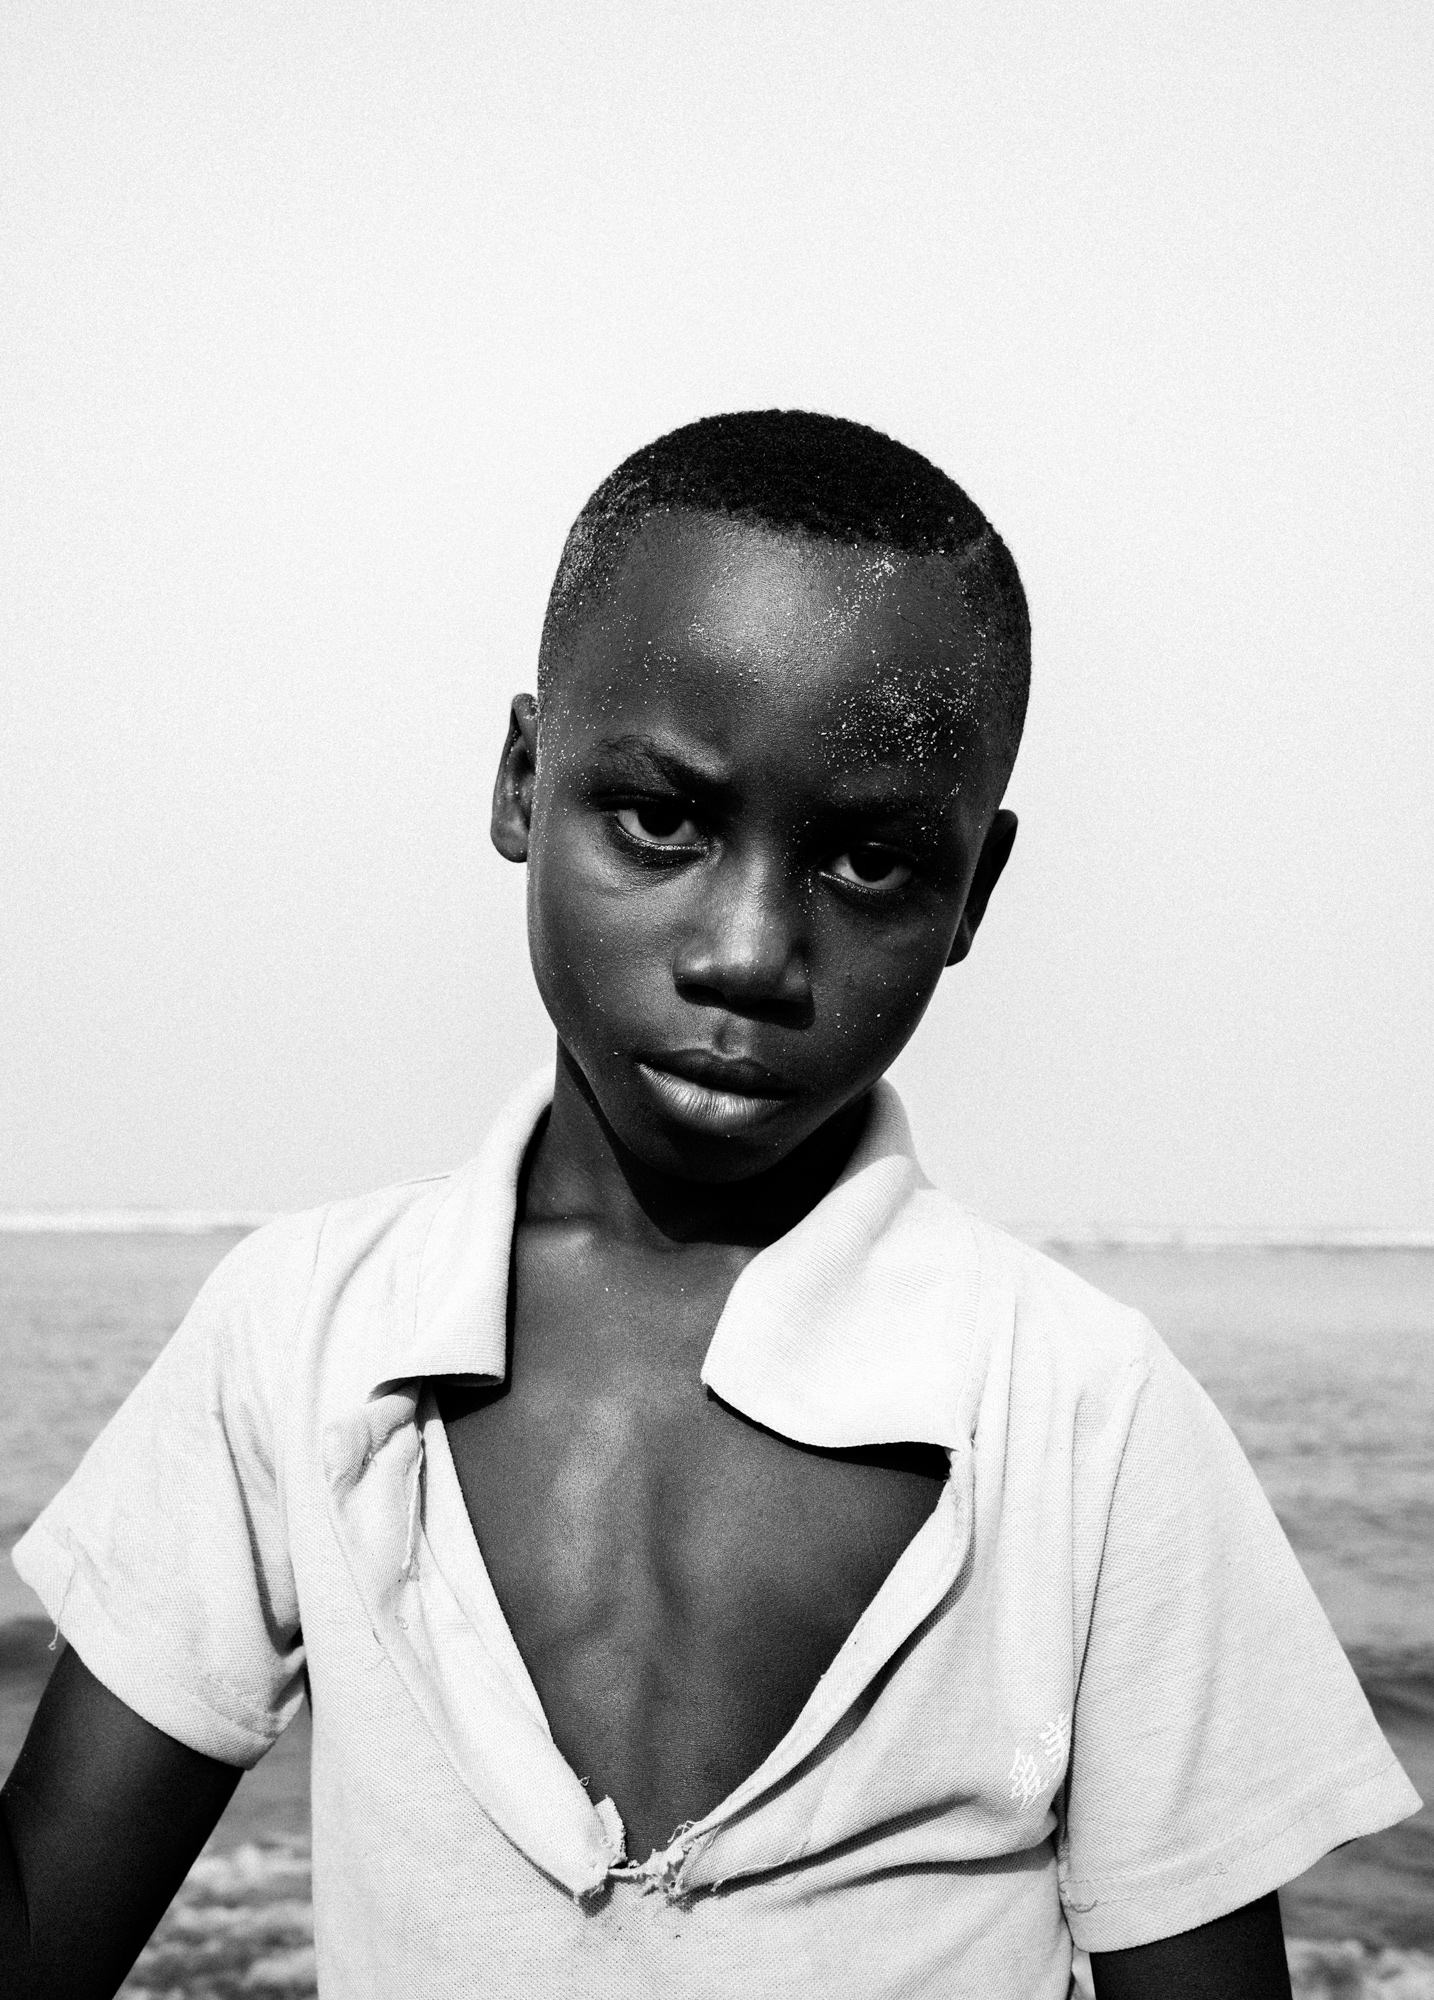  Growing up in the remote Volta river estuary in the South eastern part of Ghana, Shane, 8, wishes to become a doctor. 